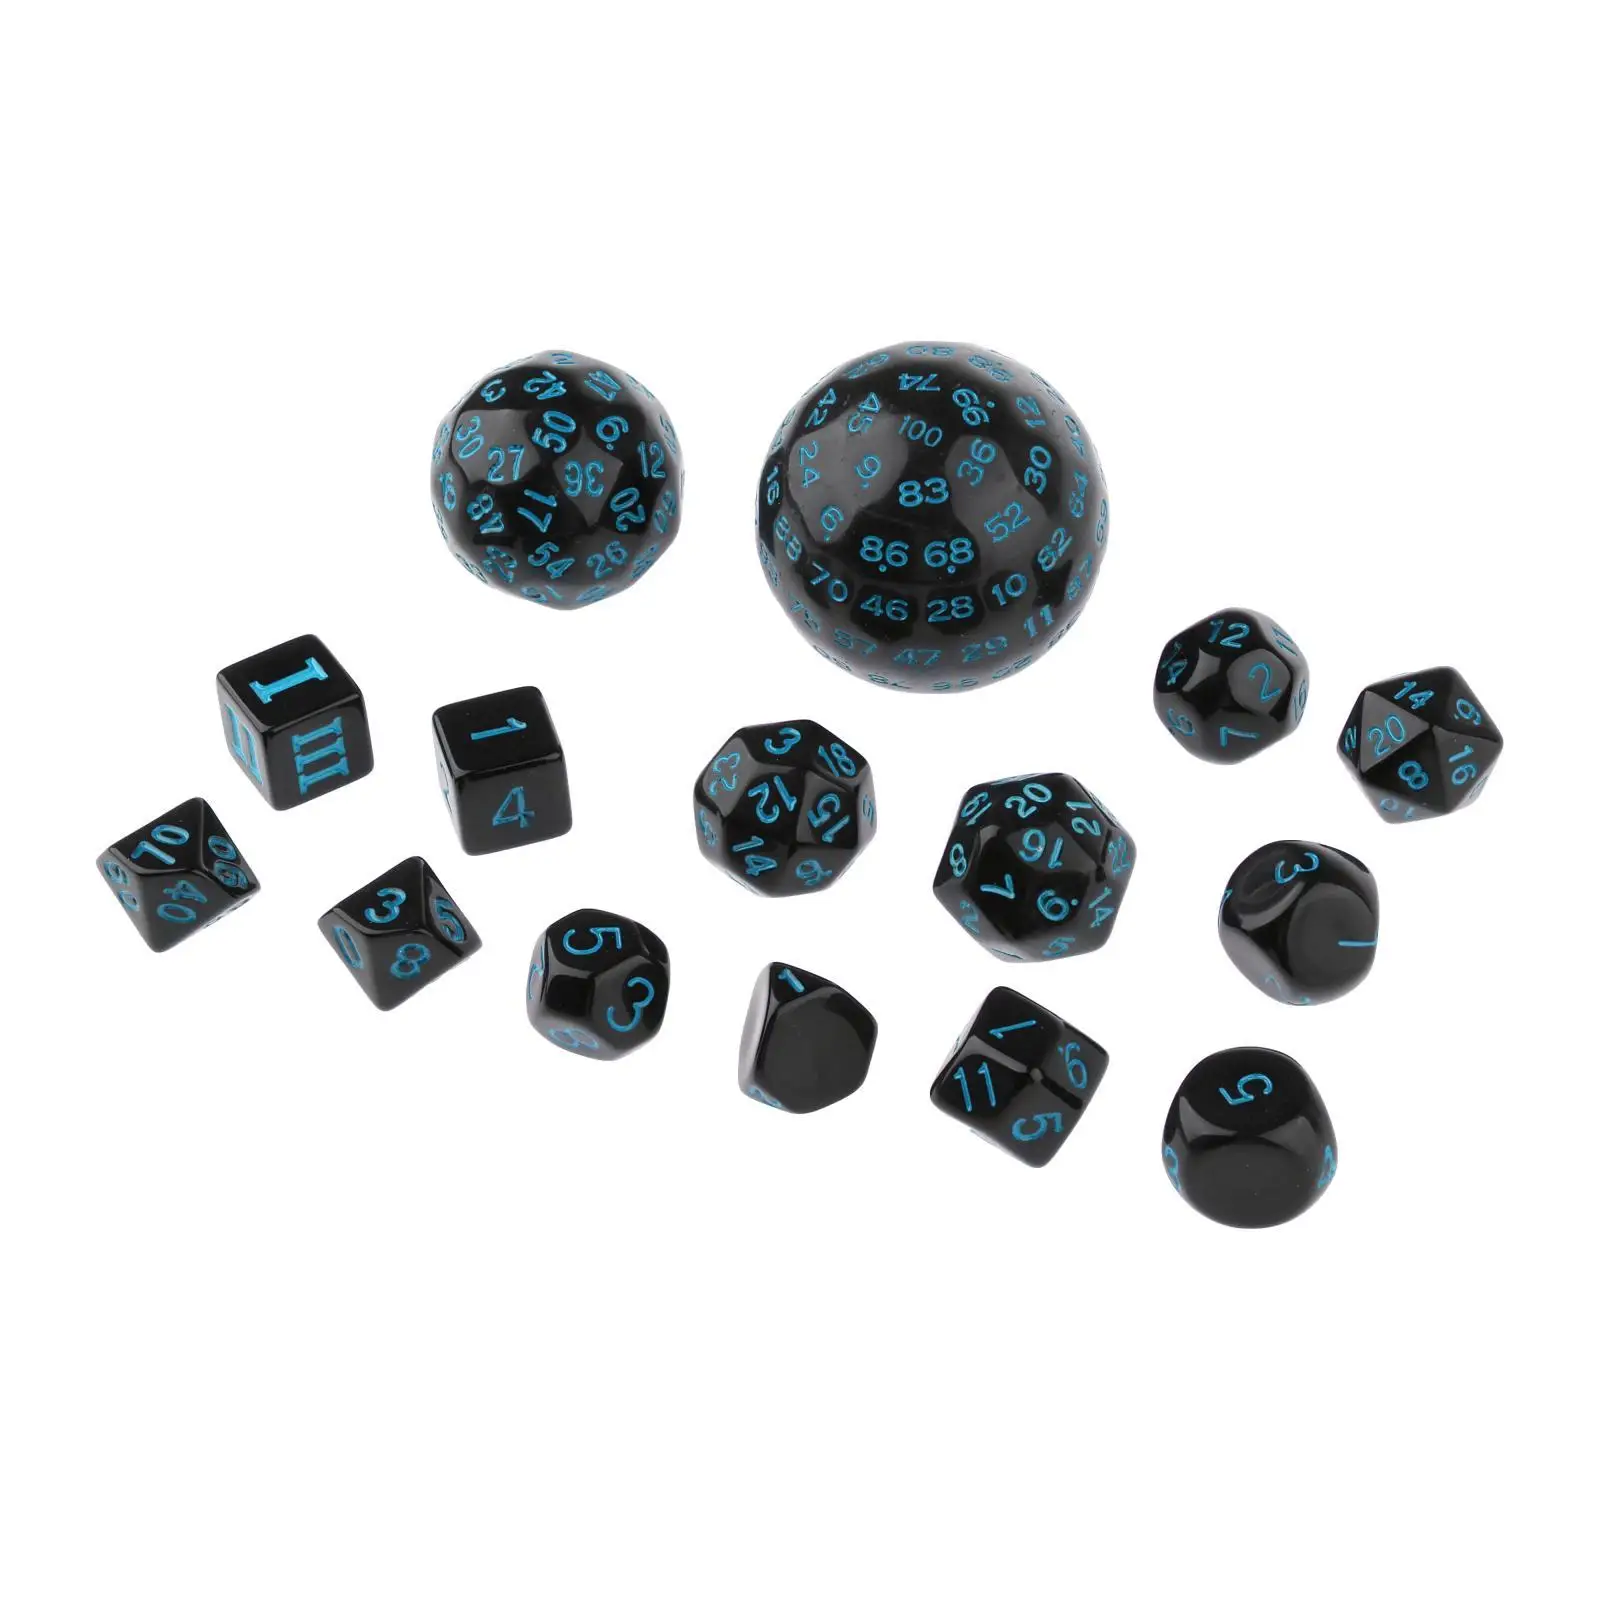 Pack of 15 Acrylic Polyhedral Digital Dice for DND RPG Role Play Casino